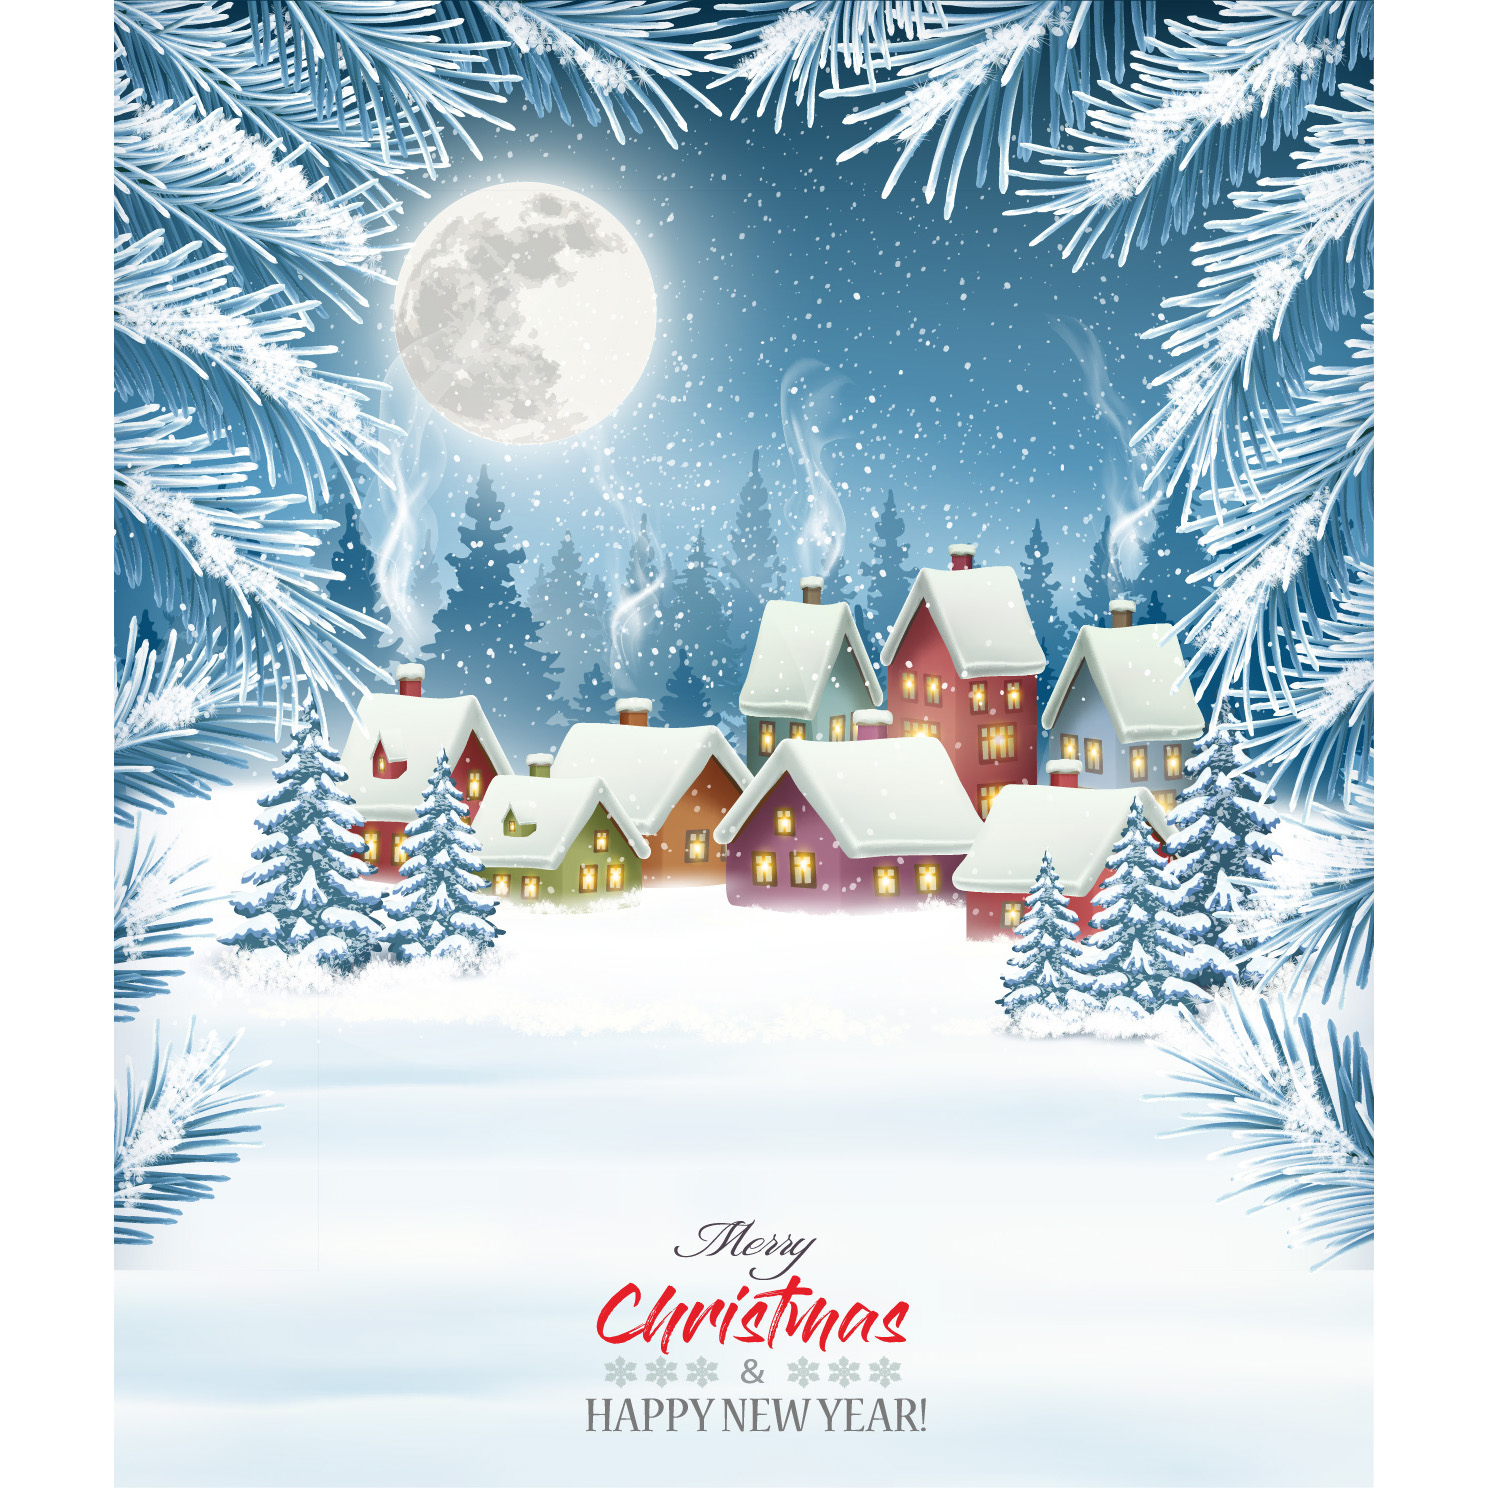 merry christmas background with winter village free vector - vectorkh